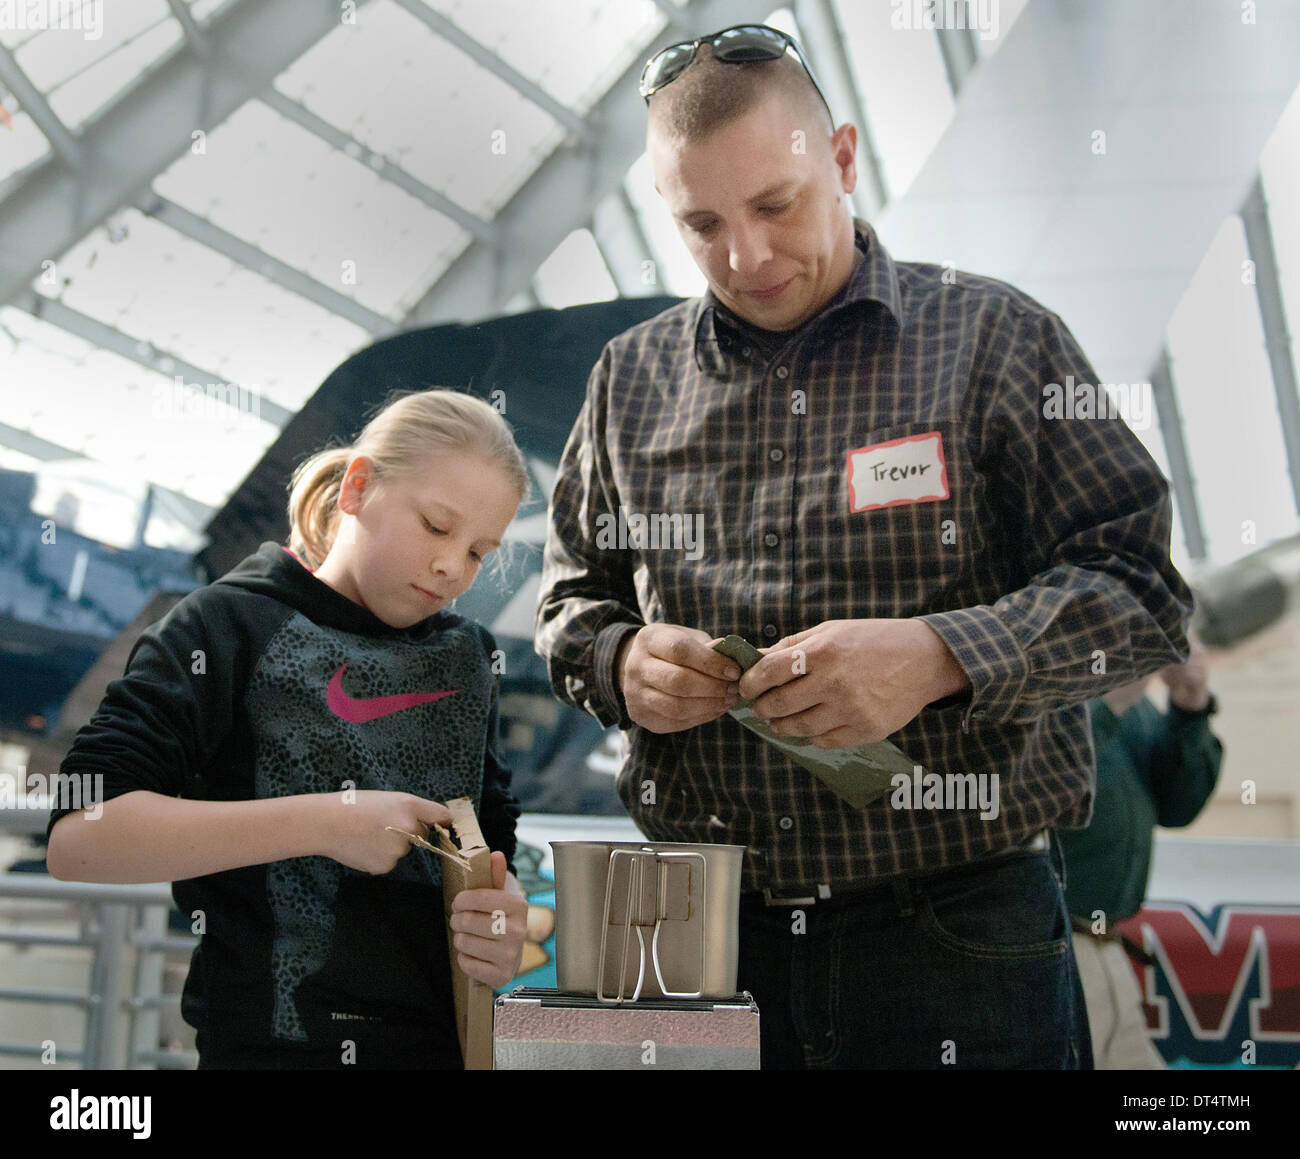 Gunnery Sgt. Trevor Havens and his daughter take part in the National Museum of the Marine Corps Second Annual MRE Cook off by combining prepackaged rations issued service members to create the best tasting meal February 1, 2014 in Triangle, VA. Pre-packaged MRE's or Meals Ready to Eat are known for their ability to deliver nutrition and not flavor. Stock Photo